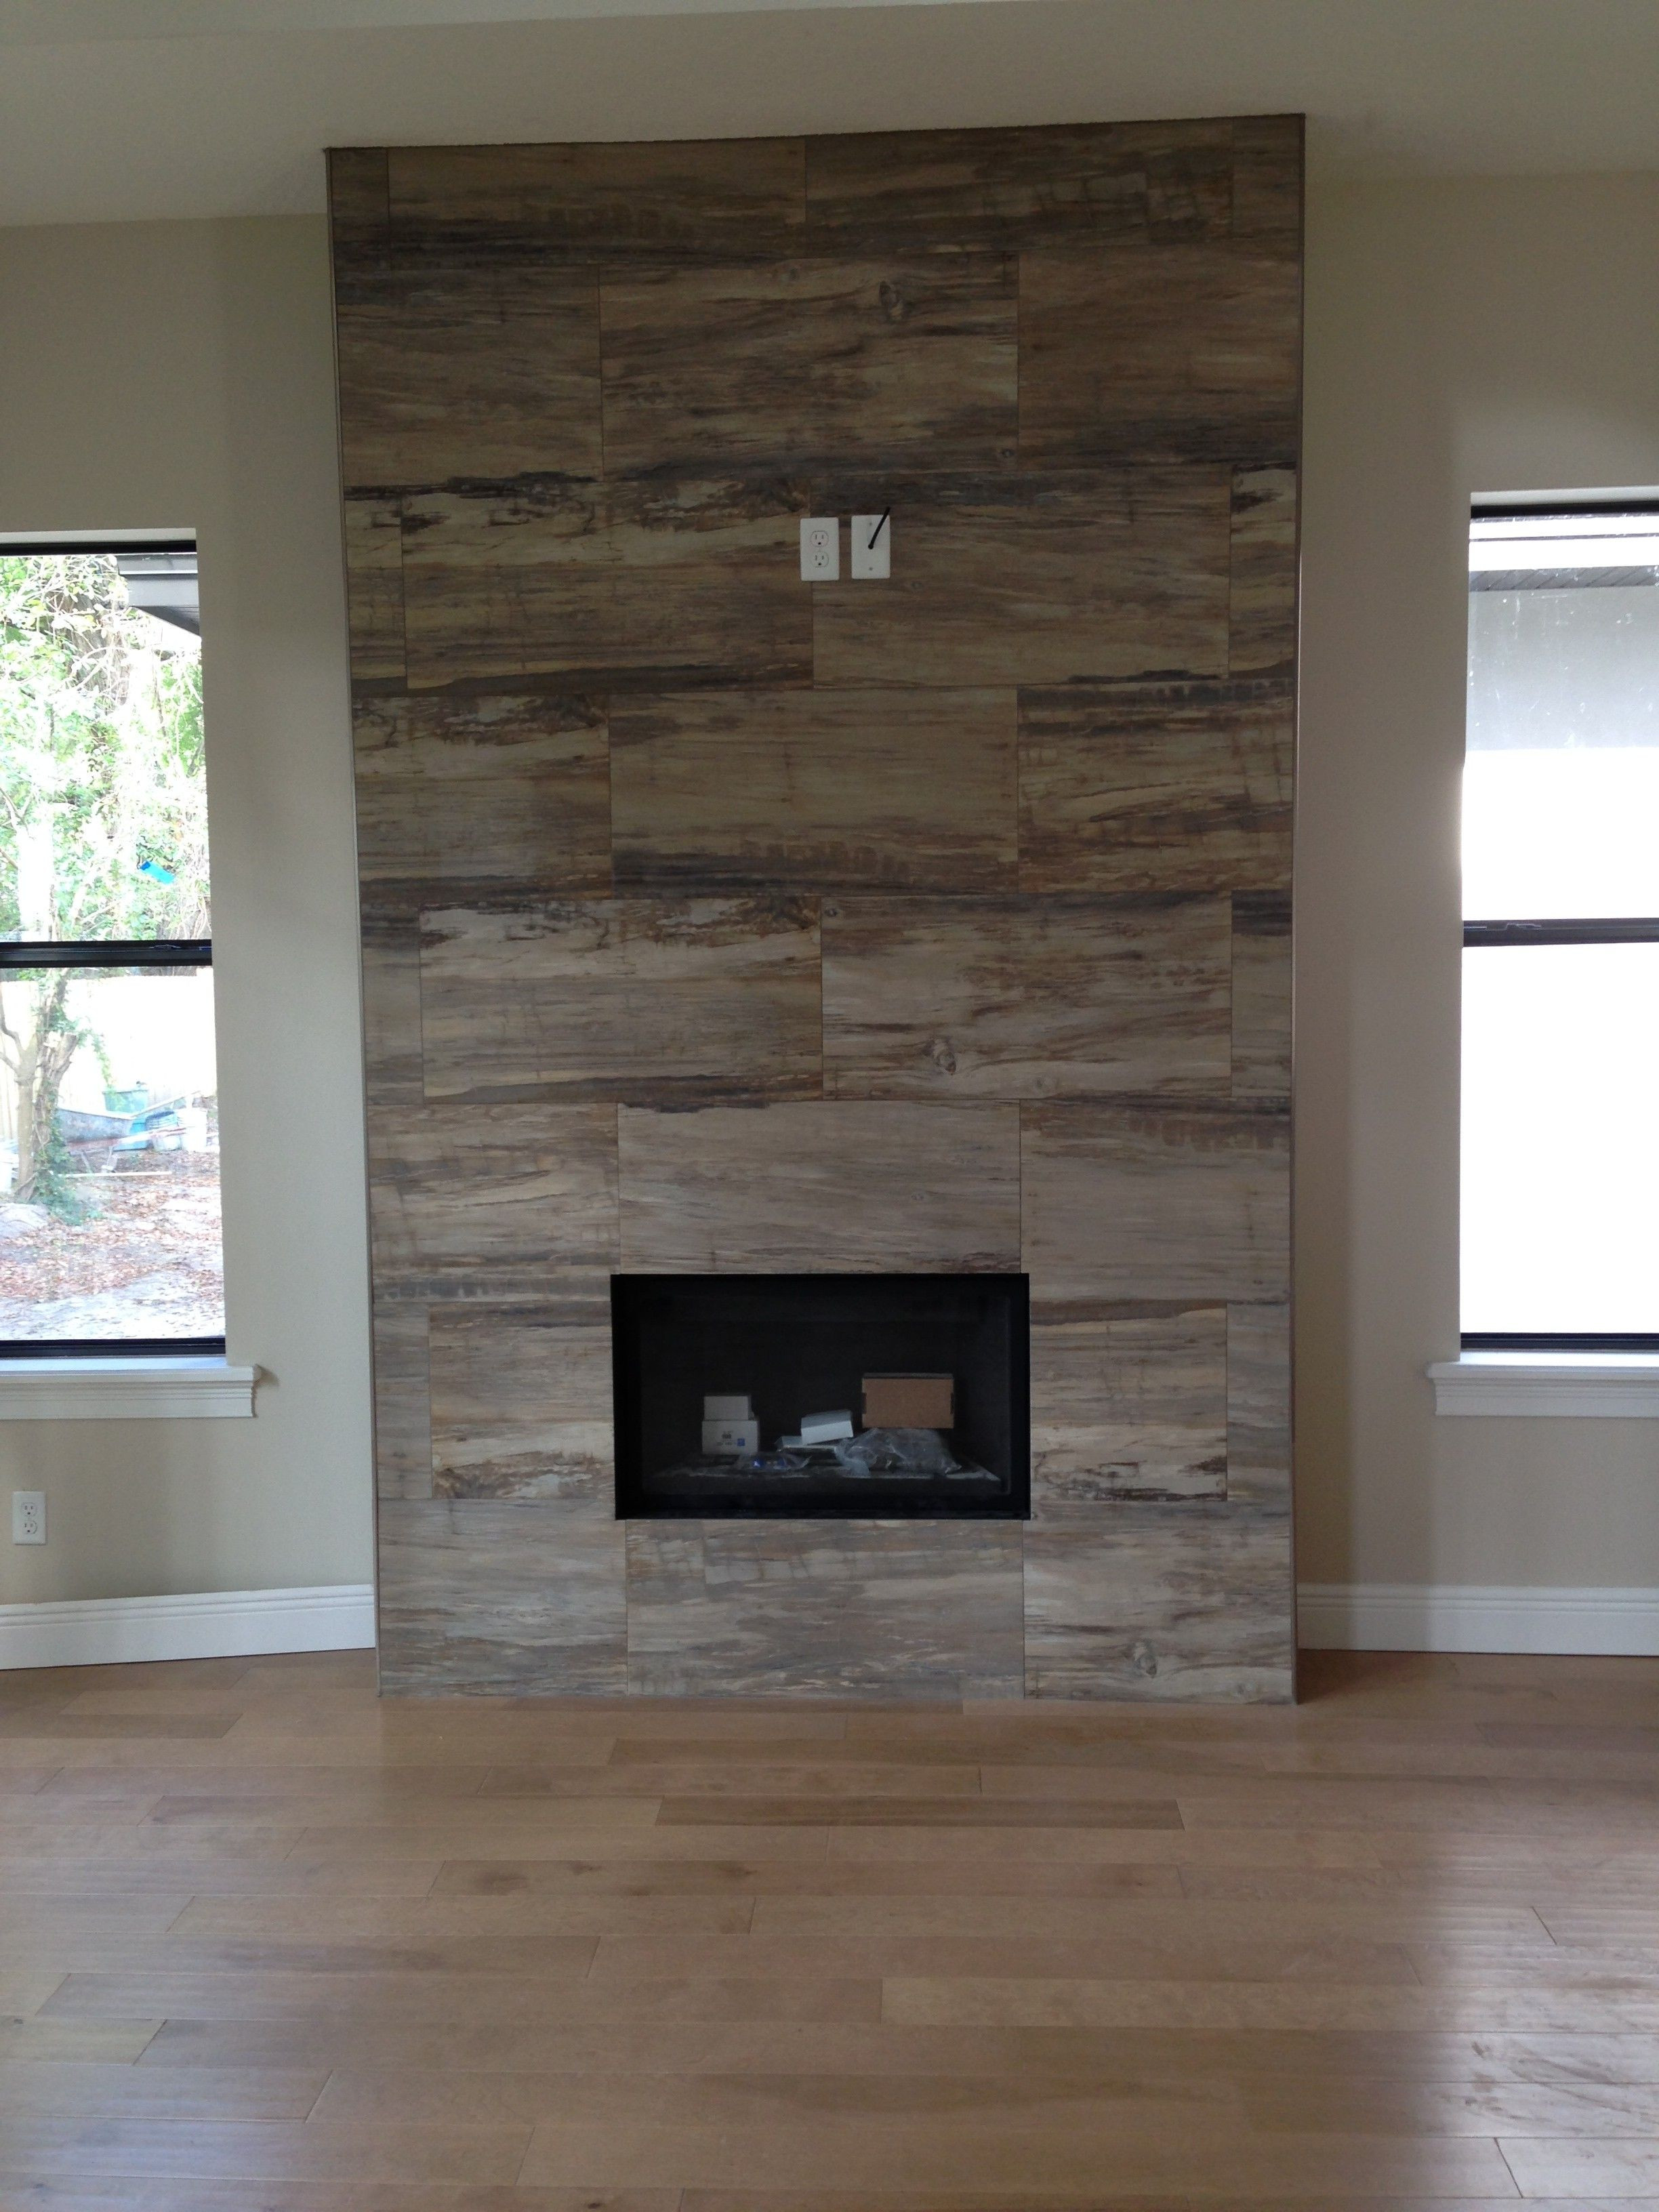 Pictures Of Fireplace Hearths New 18 Fantastic Hardwood Floors Around Brick Fireplace Hearths